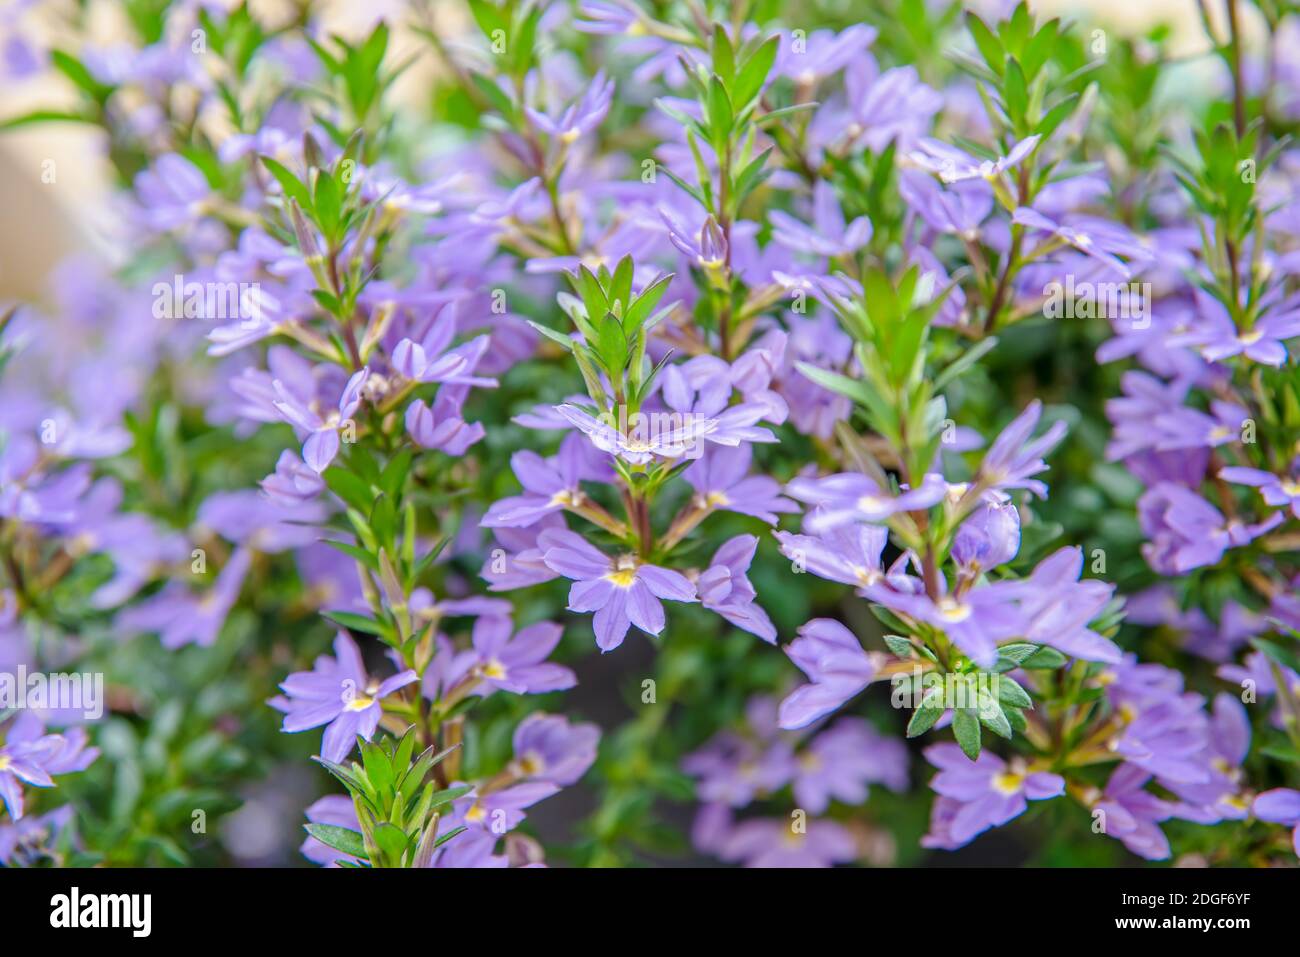 Pattern of small purple garden flowers with round petals. Phlox Stock Photo